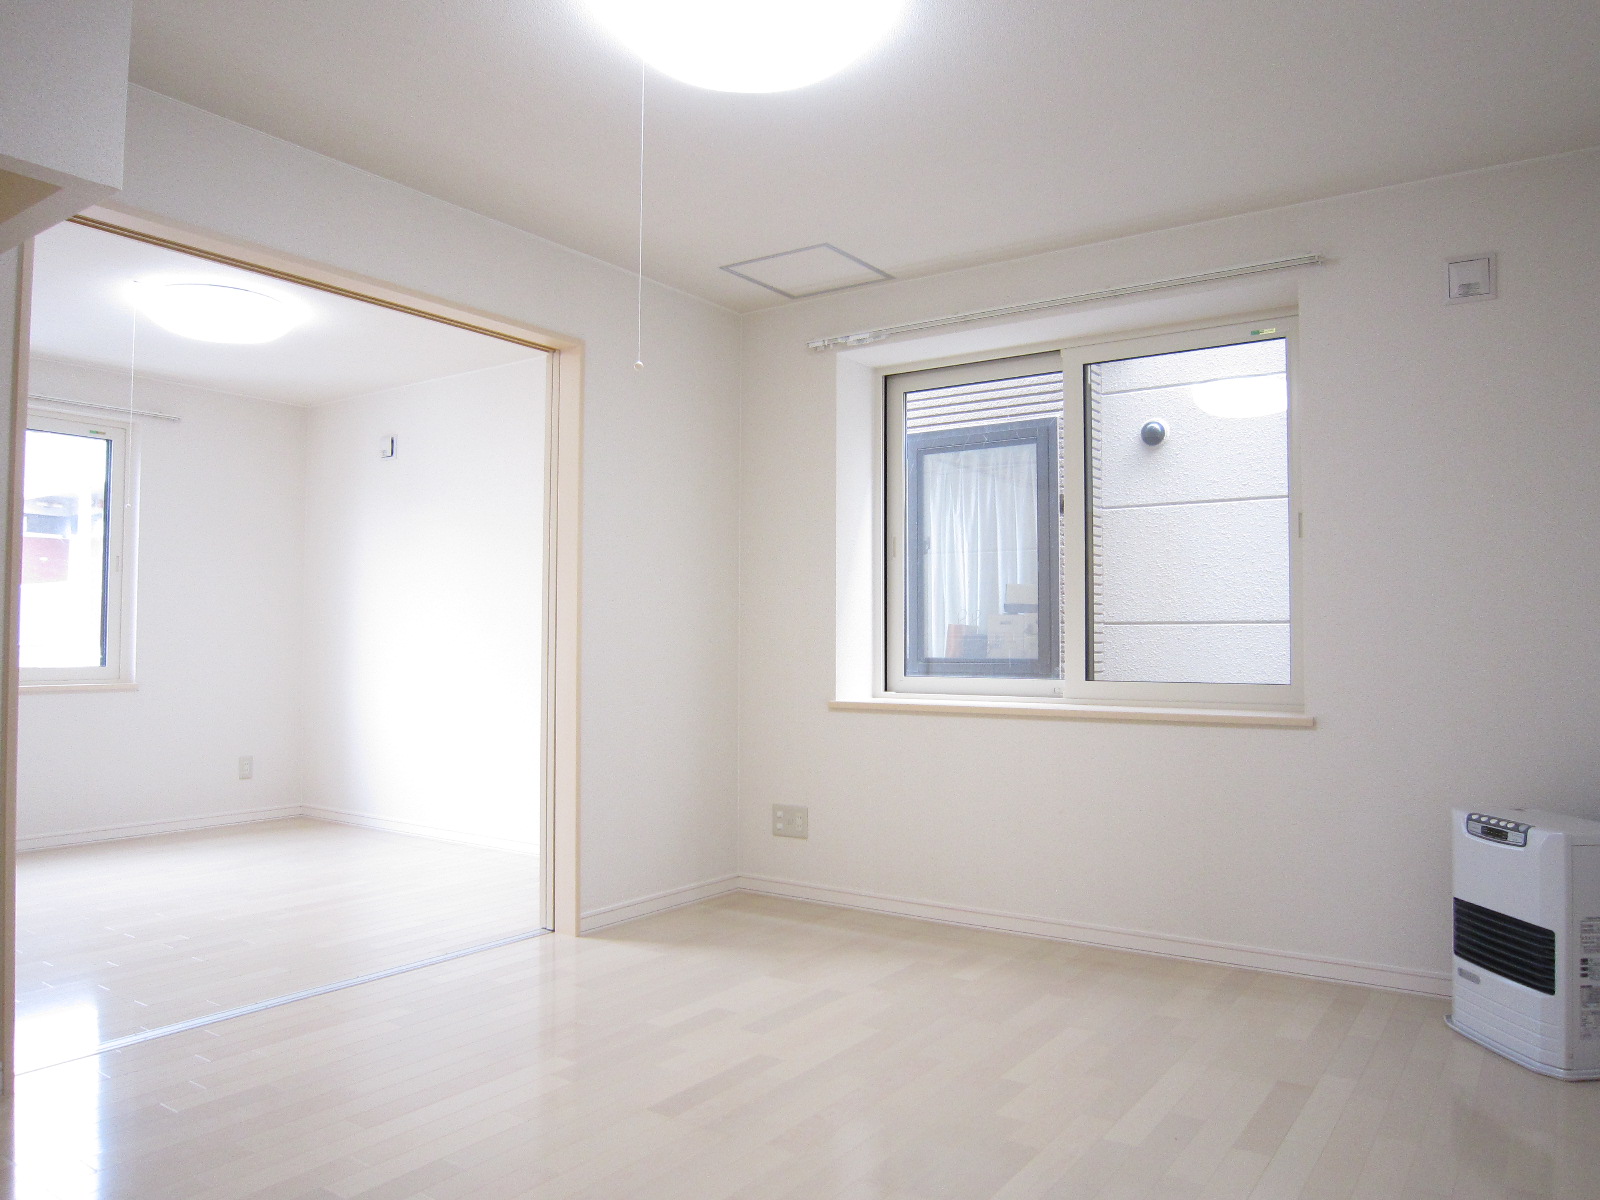 Living and room. Although dirty because it is still under construction ・  ・  ・ 